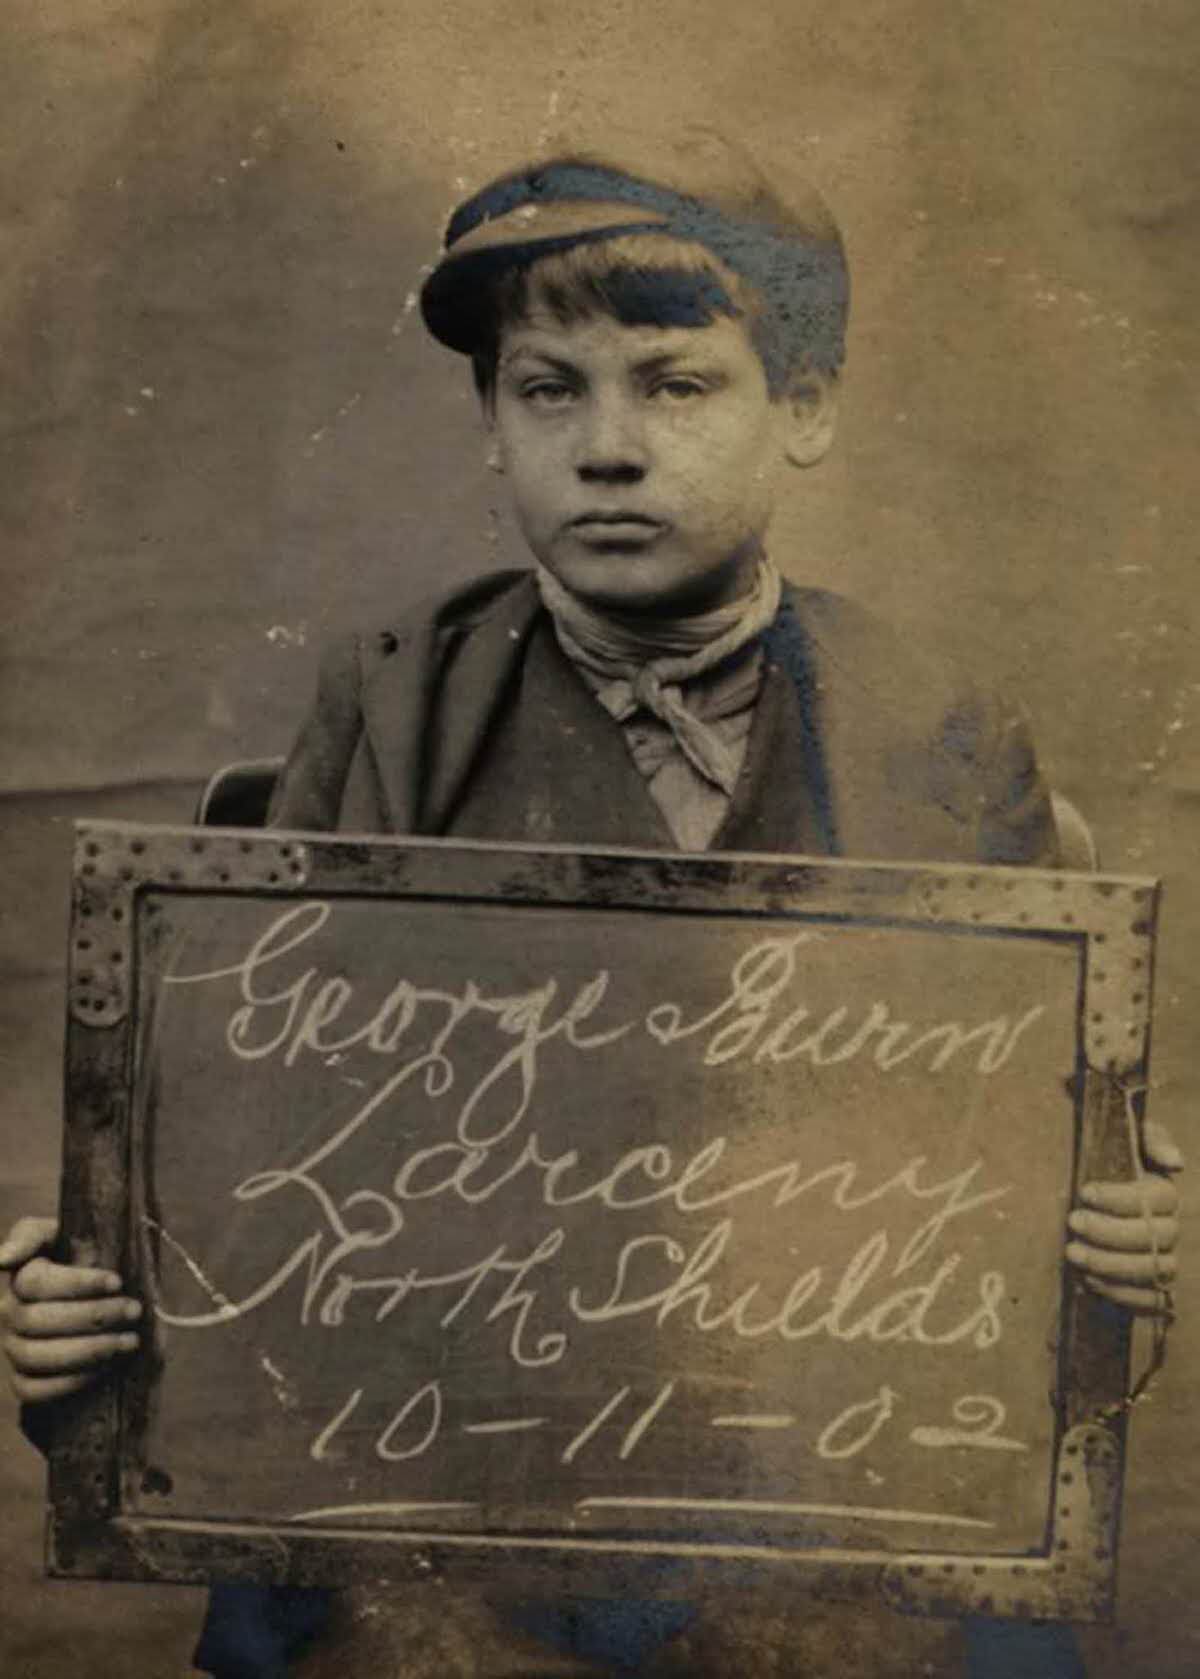 George Burn, 14, arrested for stealing brushes and a box, 1902.